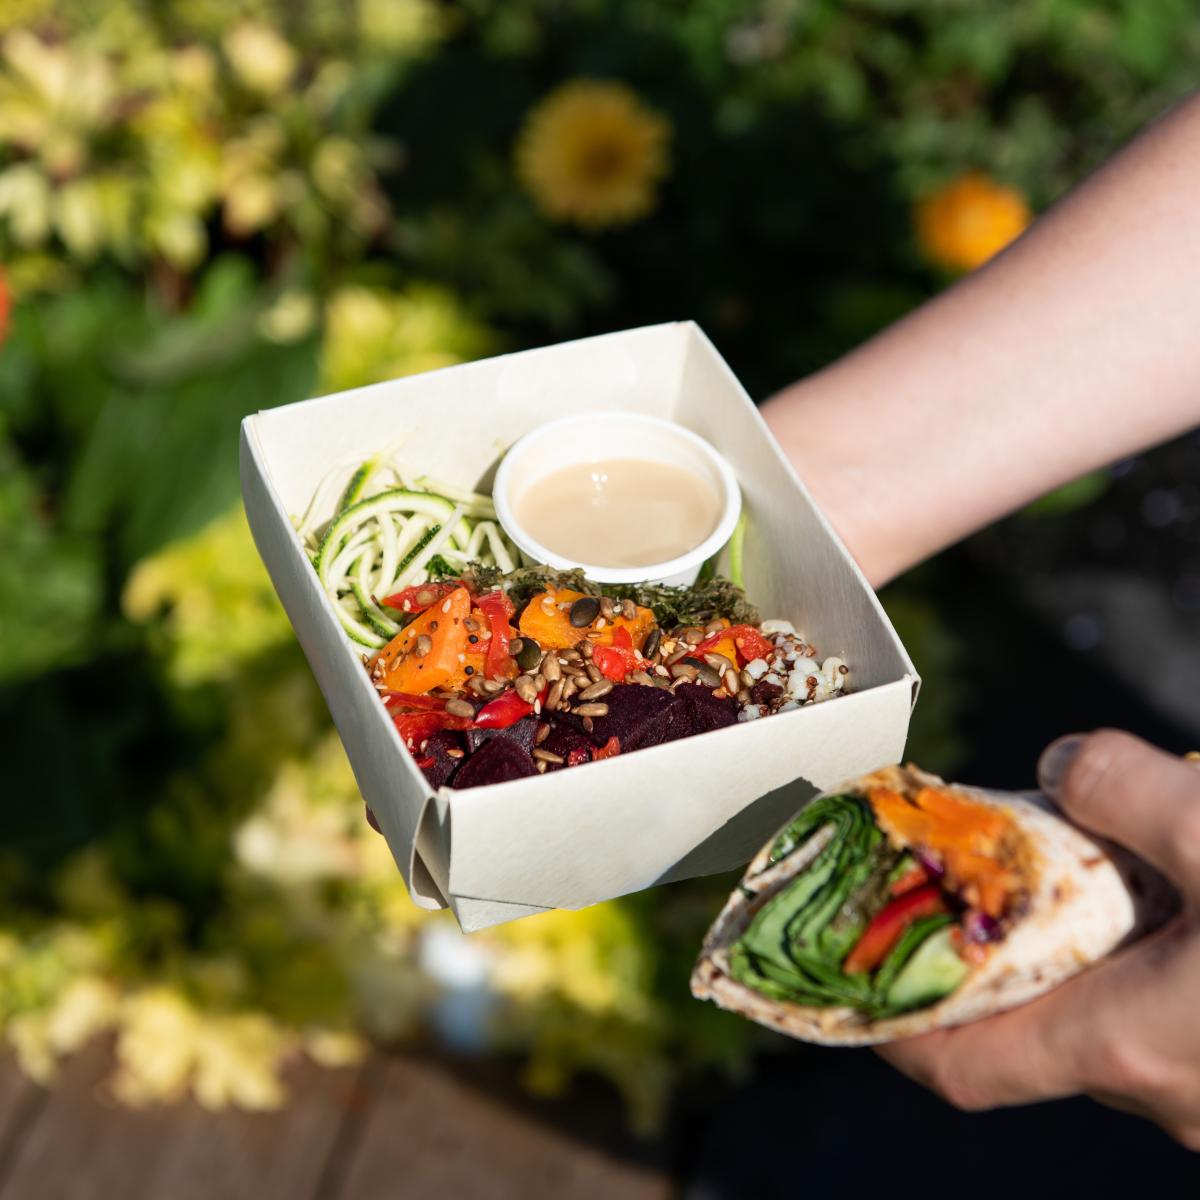 A salad and wrap from the Becoming CLIMAVORE range